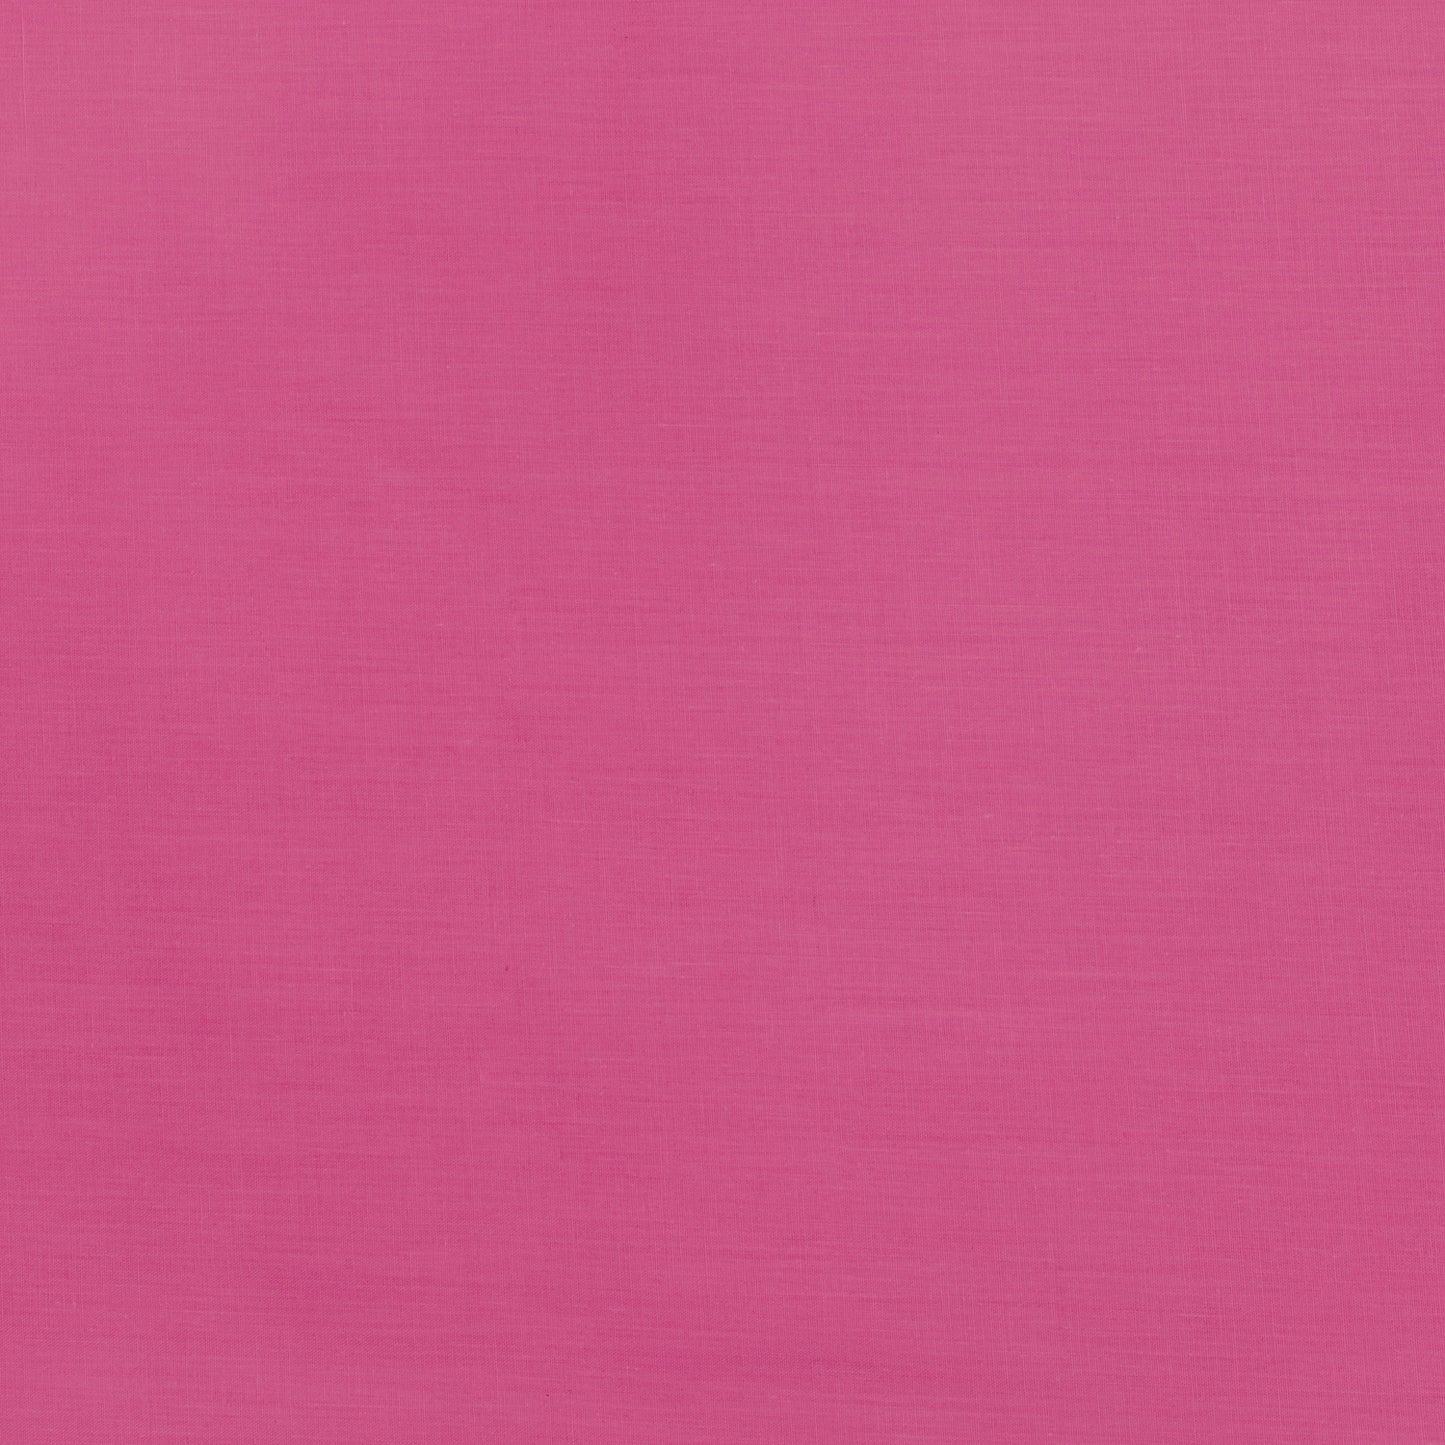 Sheeting Poly Cotton Cerise #35 - To Be Discontinued